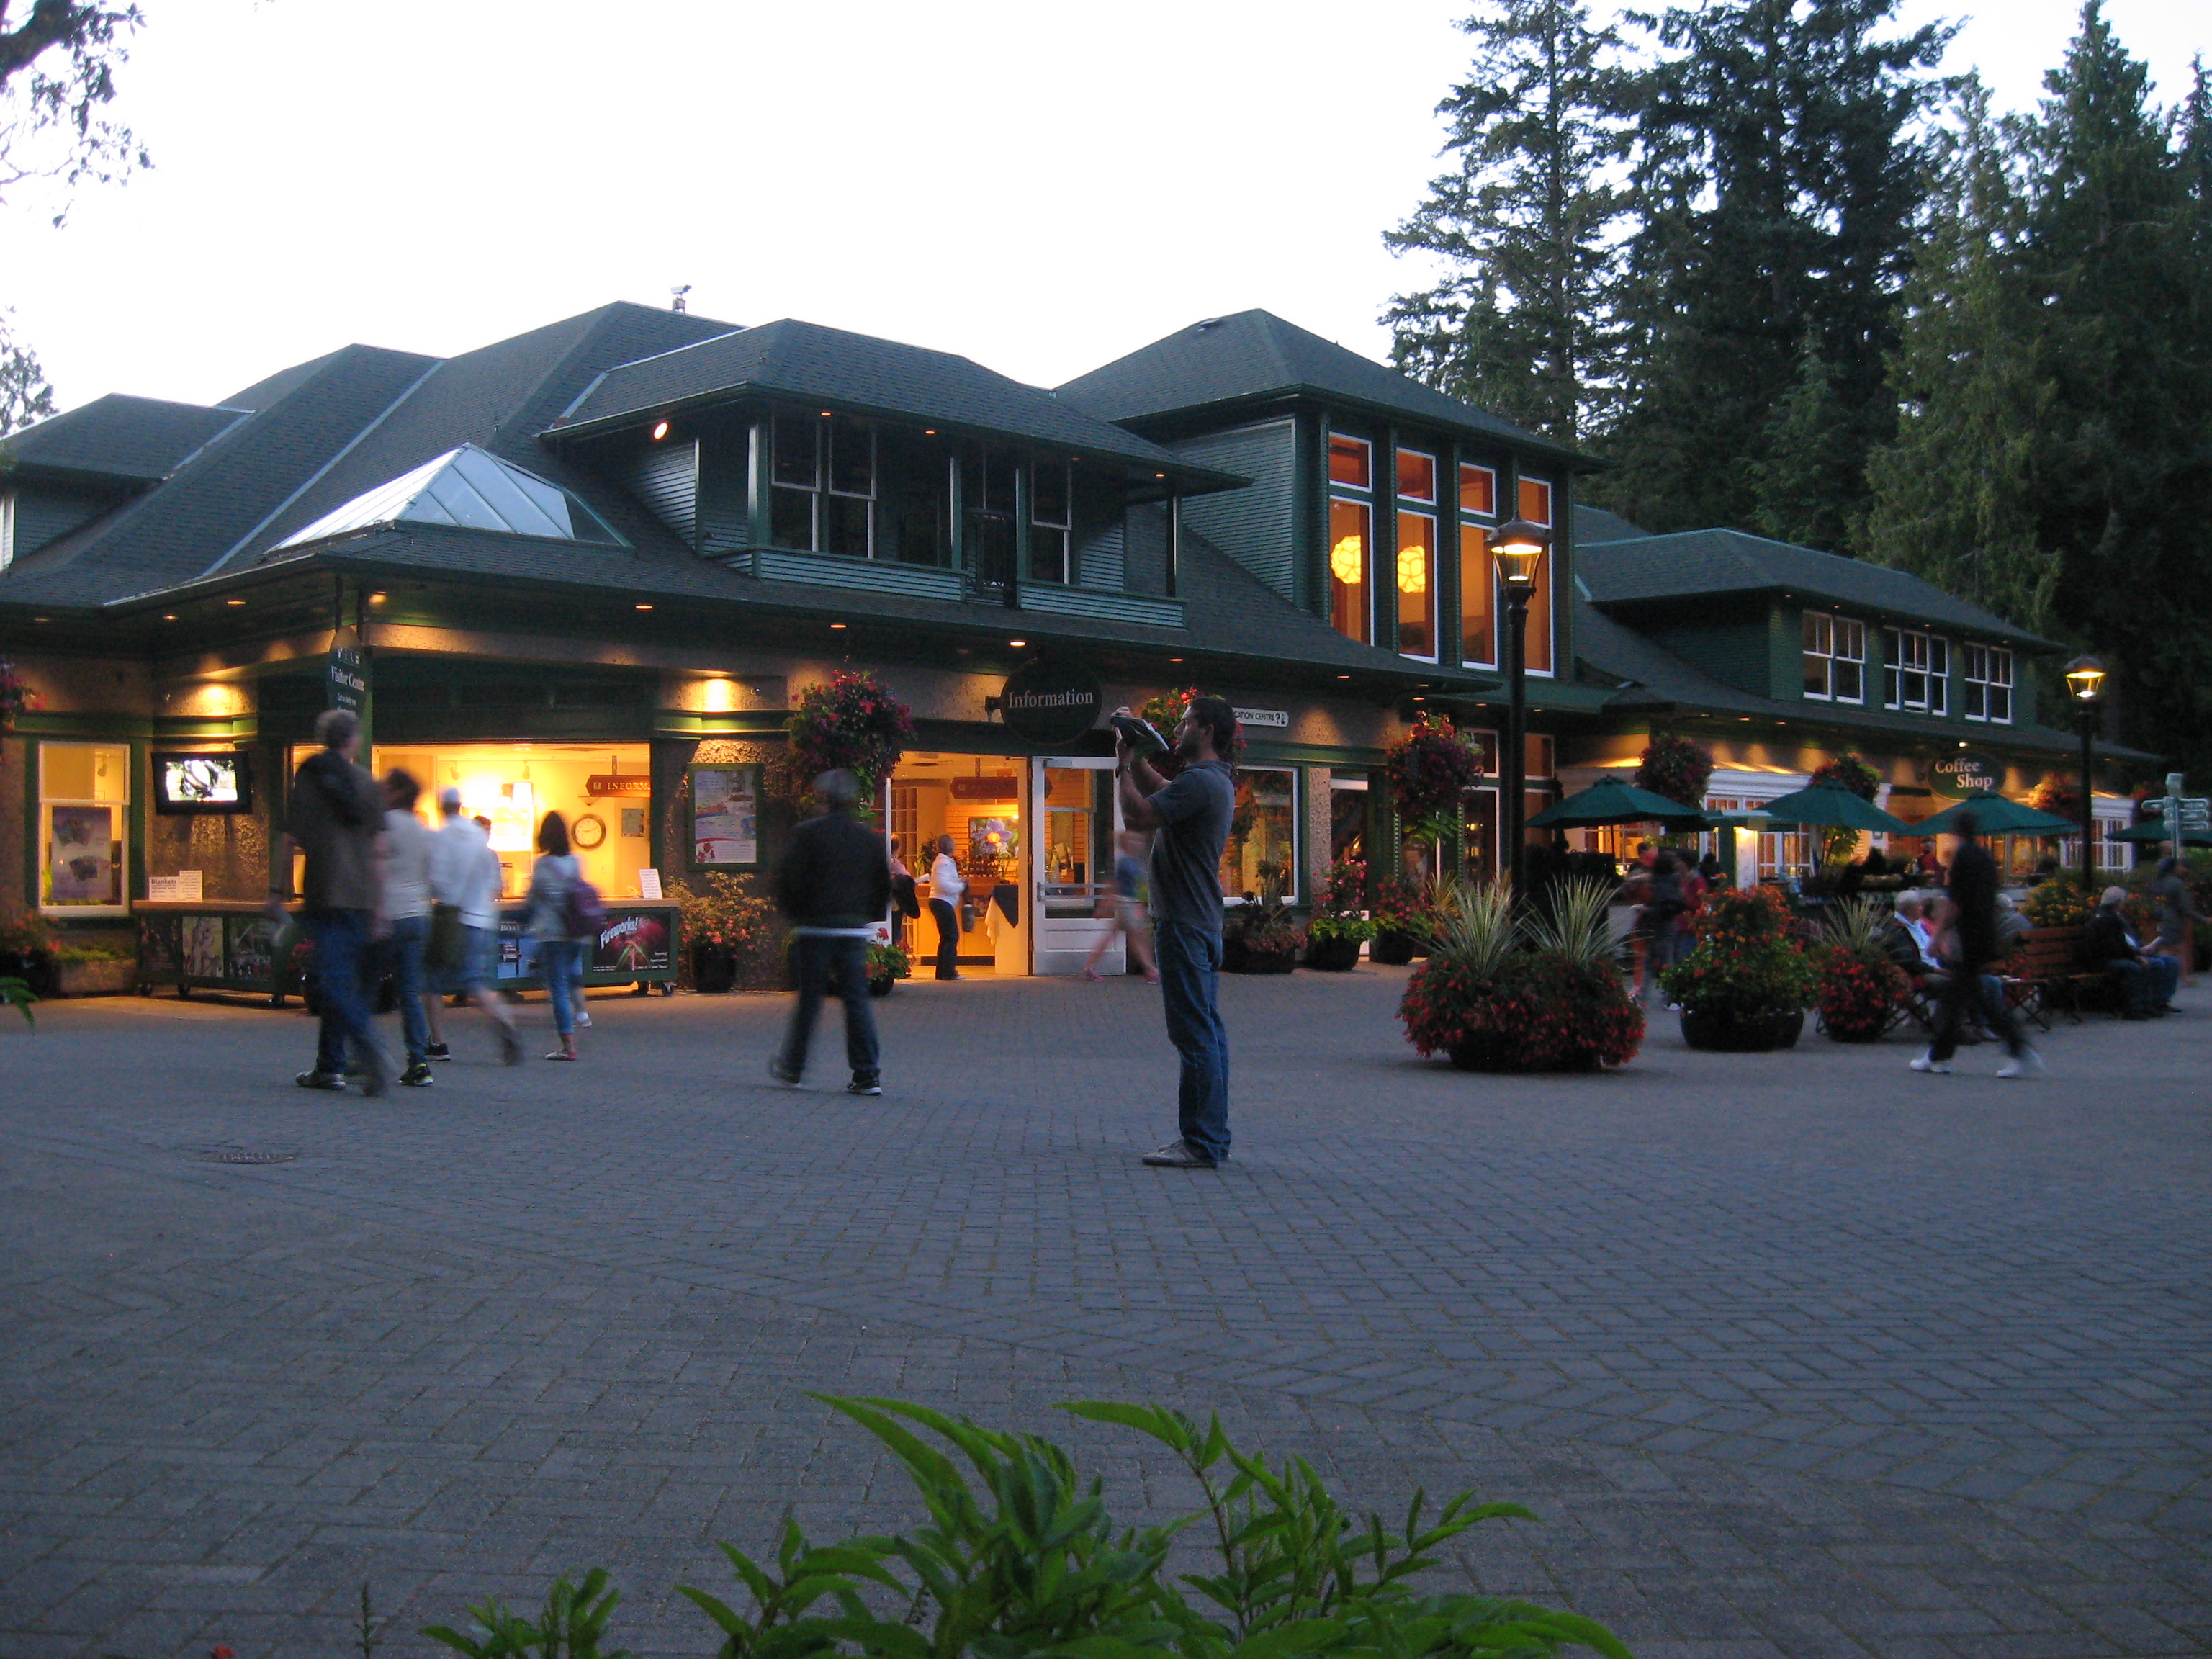 People Enjoying the Evening outside the Visitor Centre at Butchart Gardens